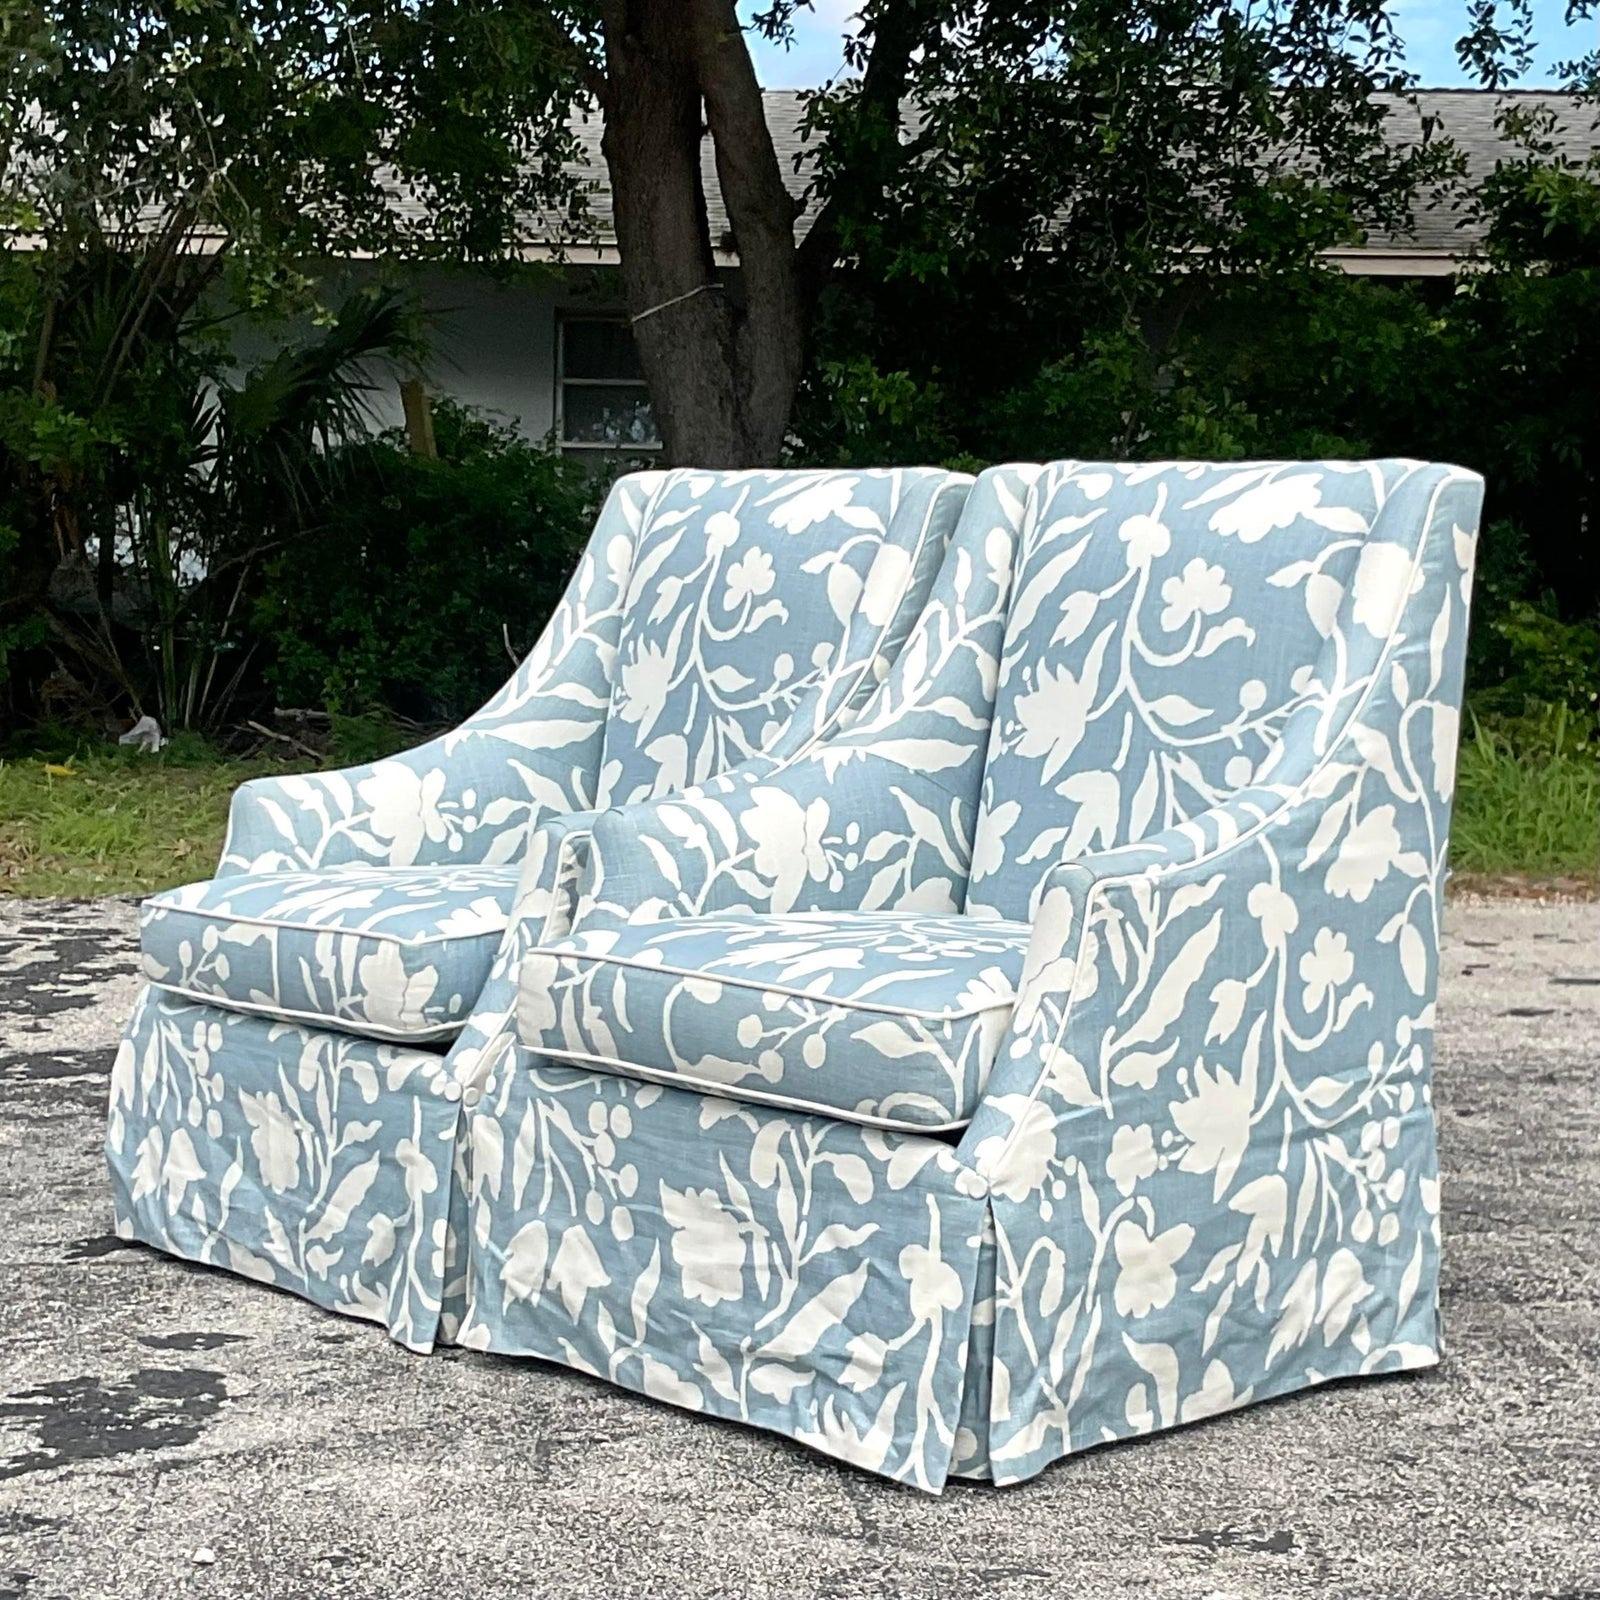 Fabric Vintage Coastal Cooper Brothers Printed Leaf Lounge Chairs, a Pair